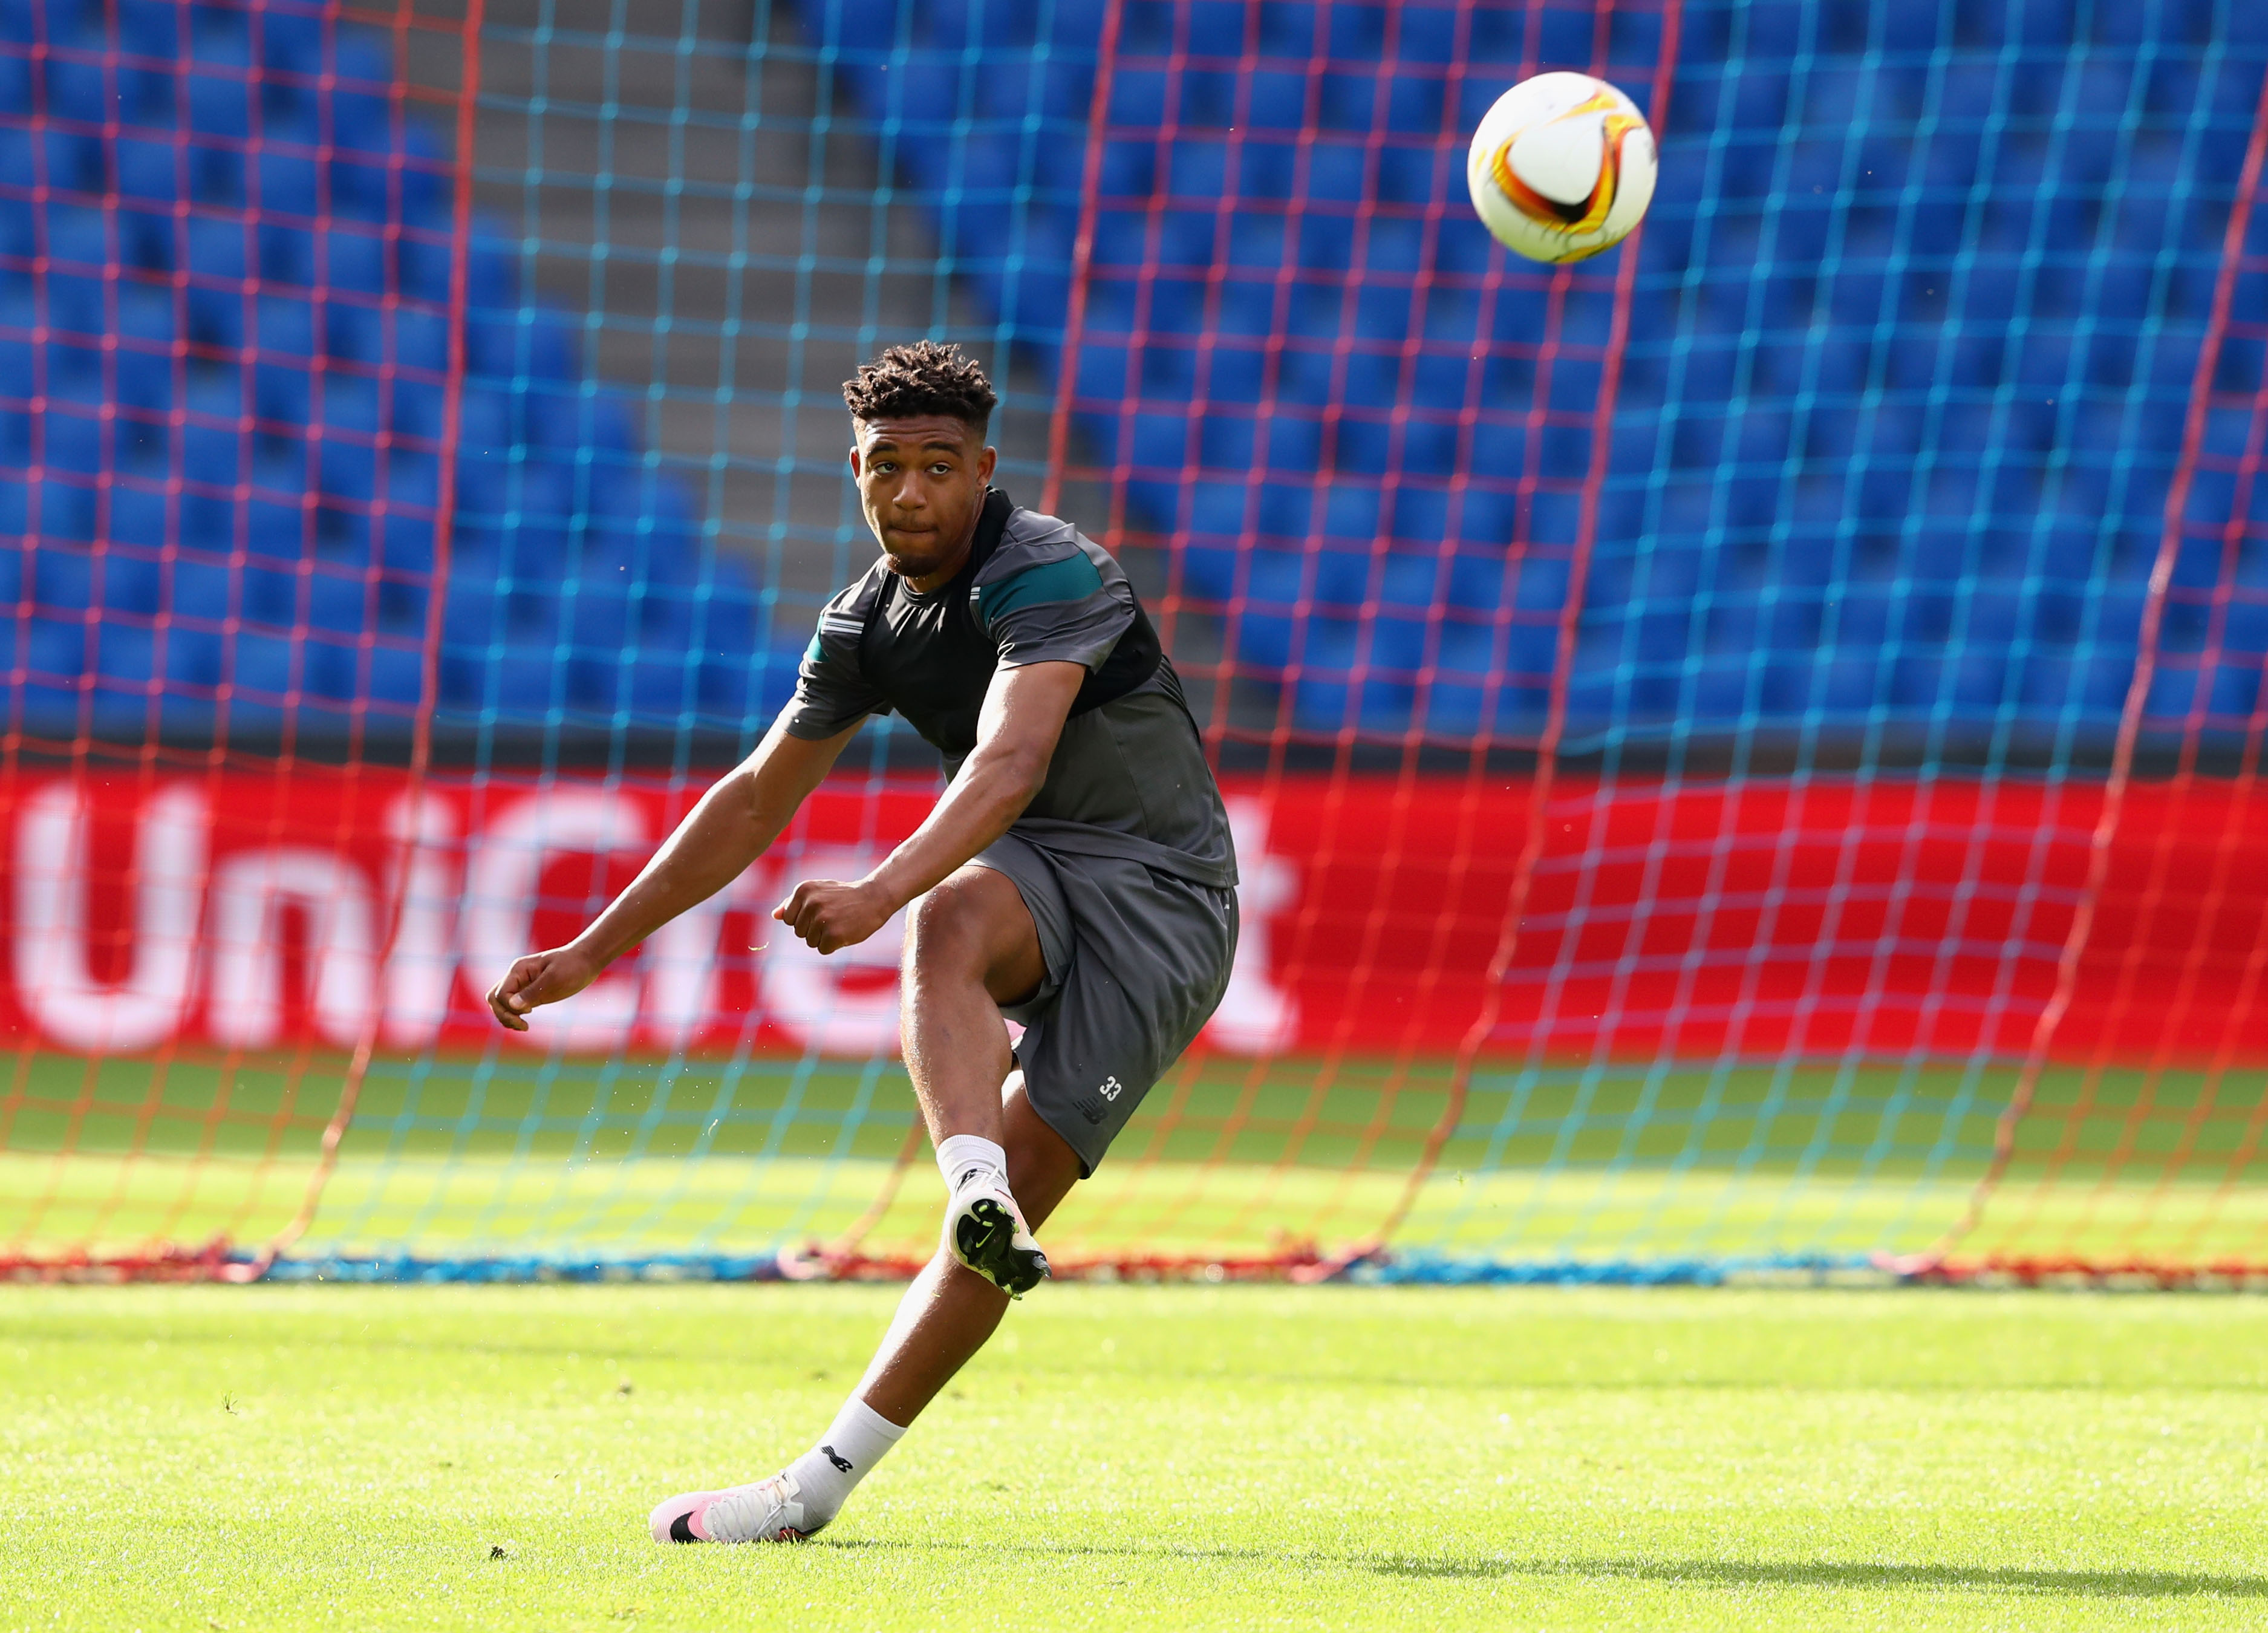 Jordan Ibe has already started impressing at Bournemouth and could move back to Liverpool in the future if he continues to put in consistently great shifts for his new club (Picture Courtesy - AFP/Getty Images)